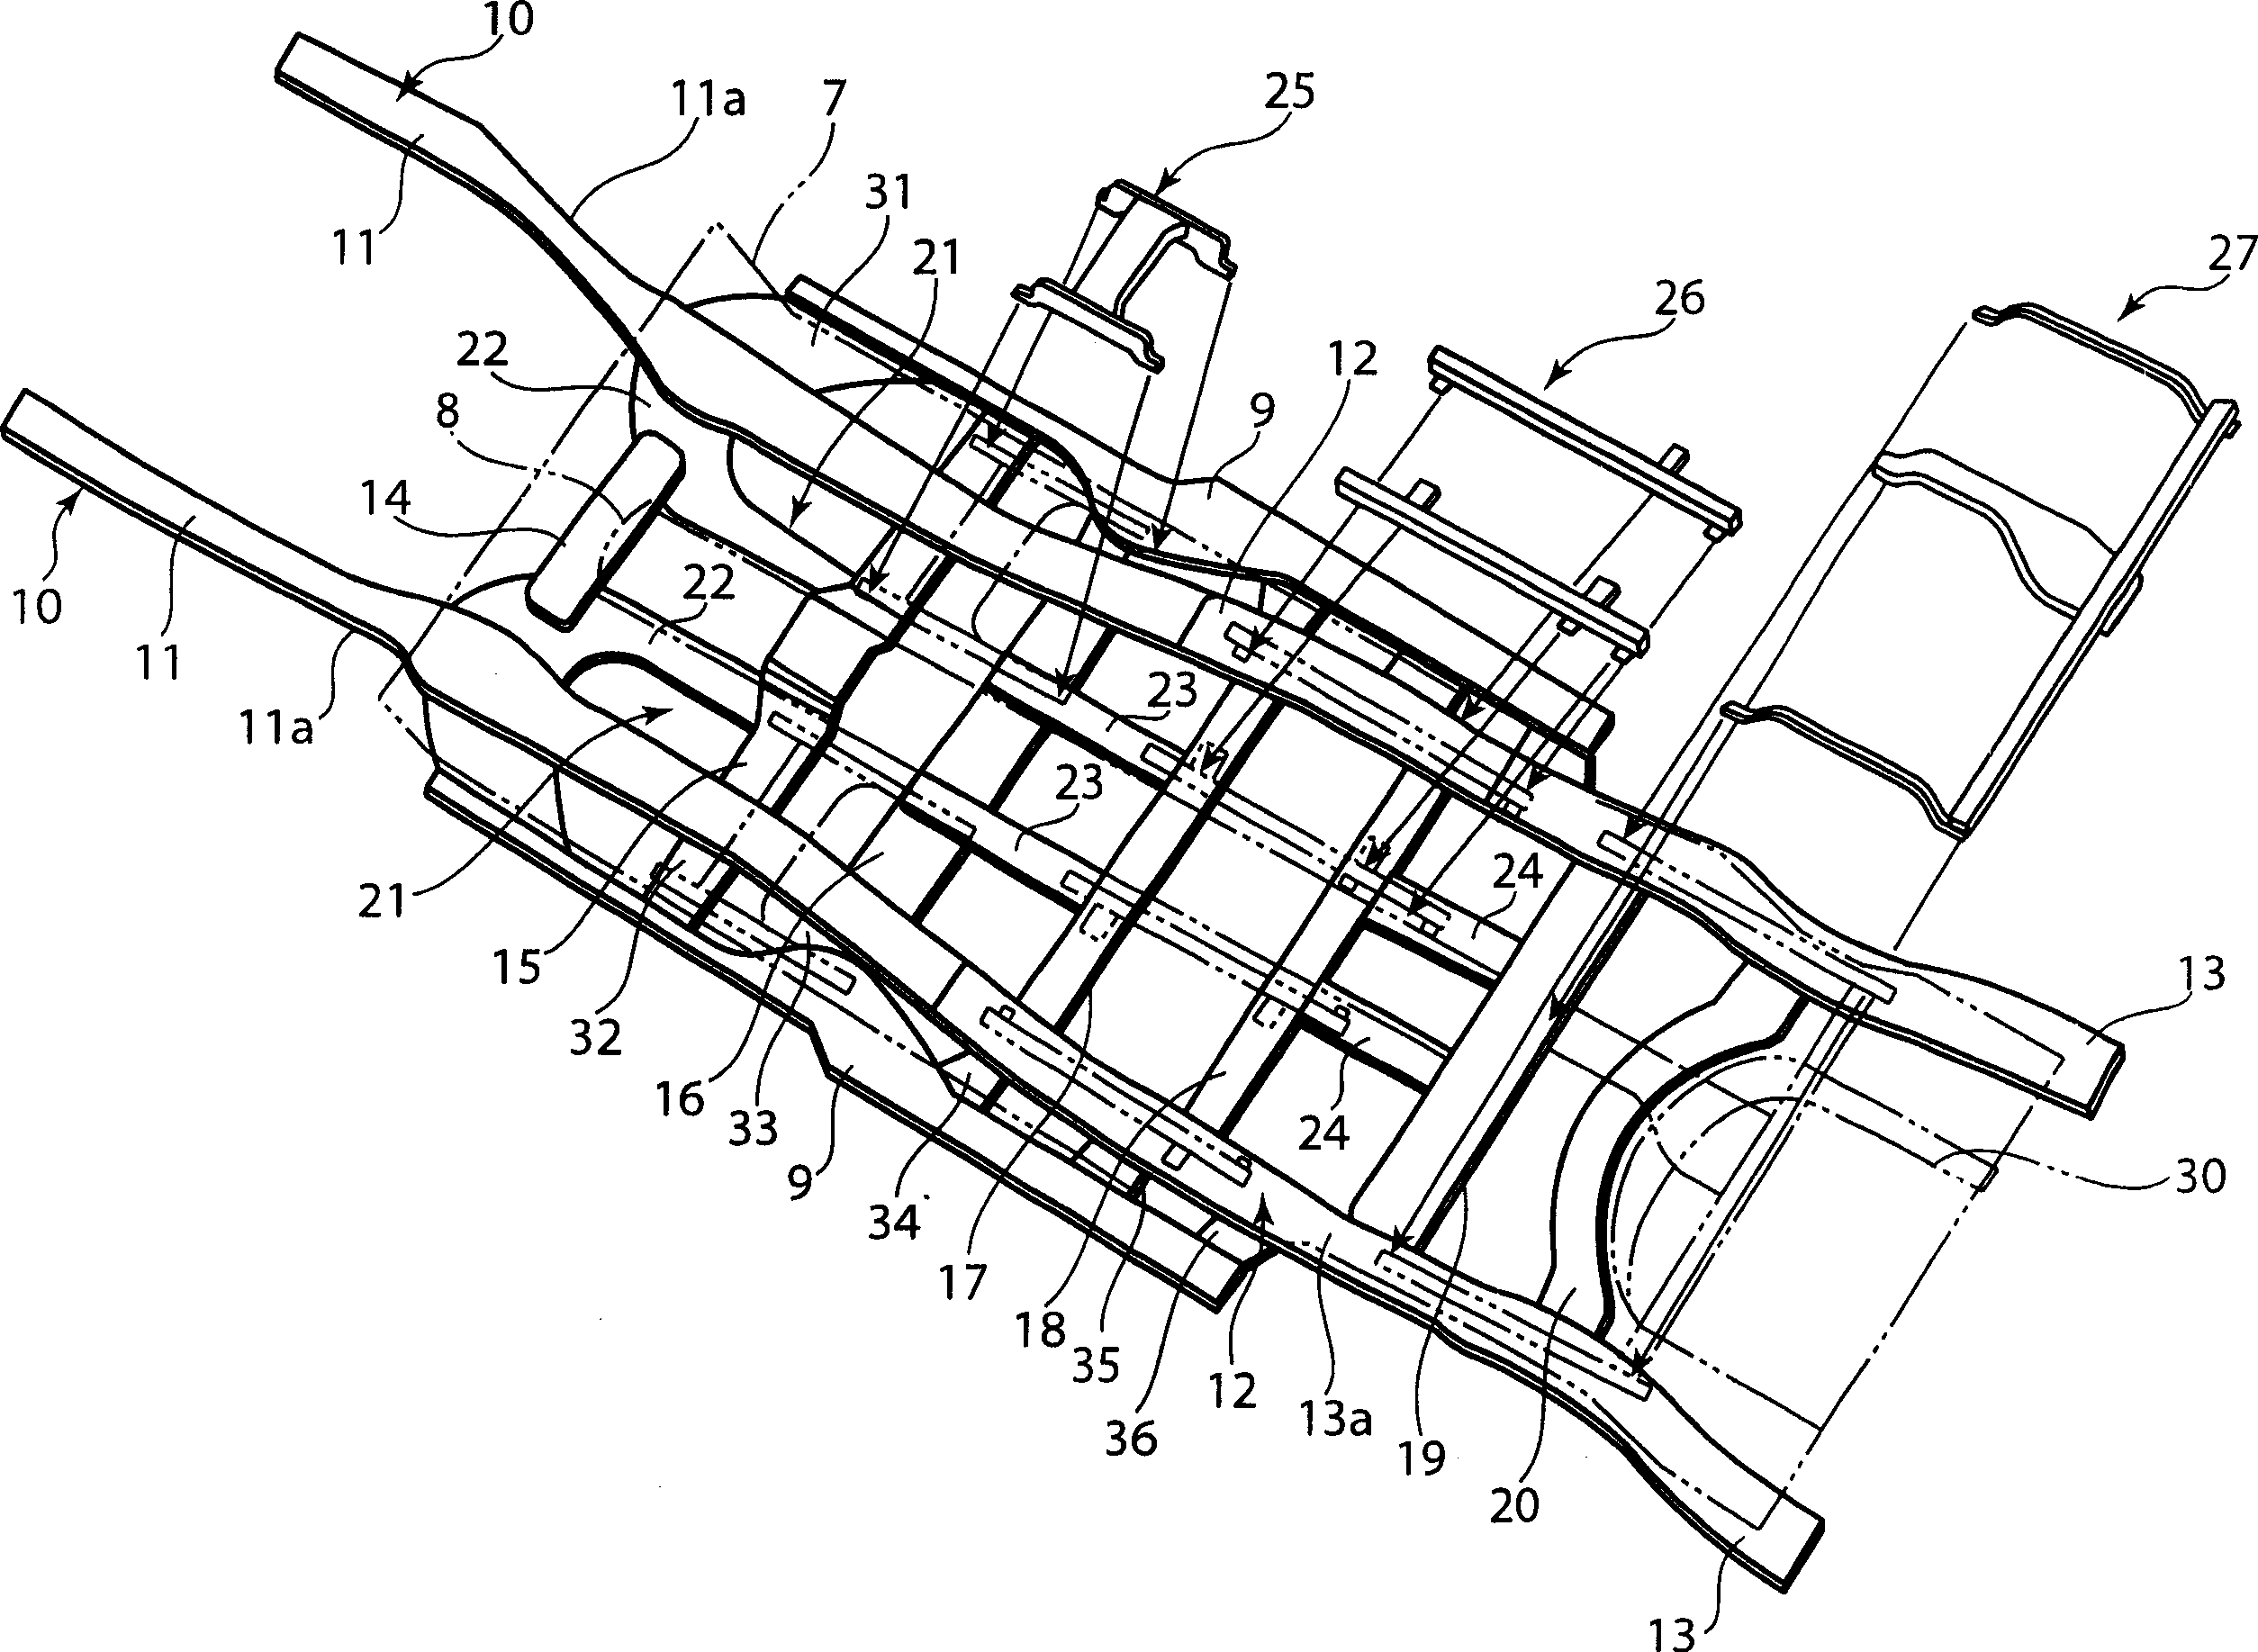 Underside body structure of vehicle